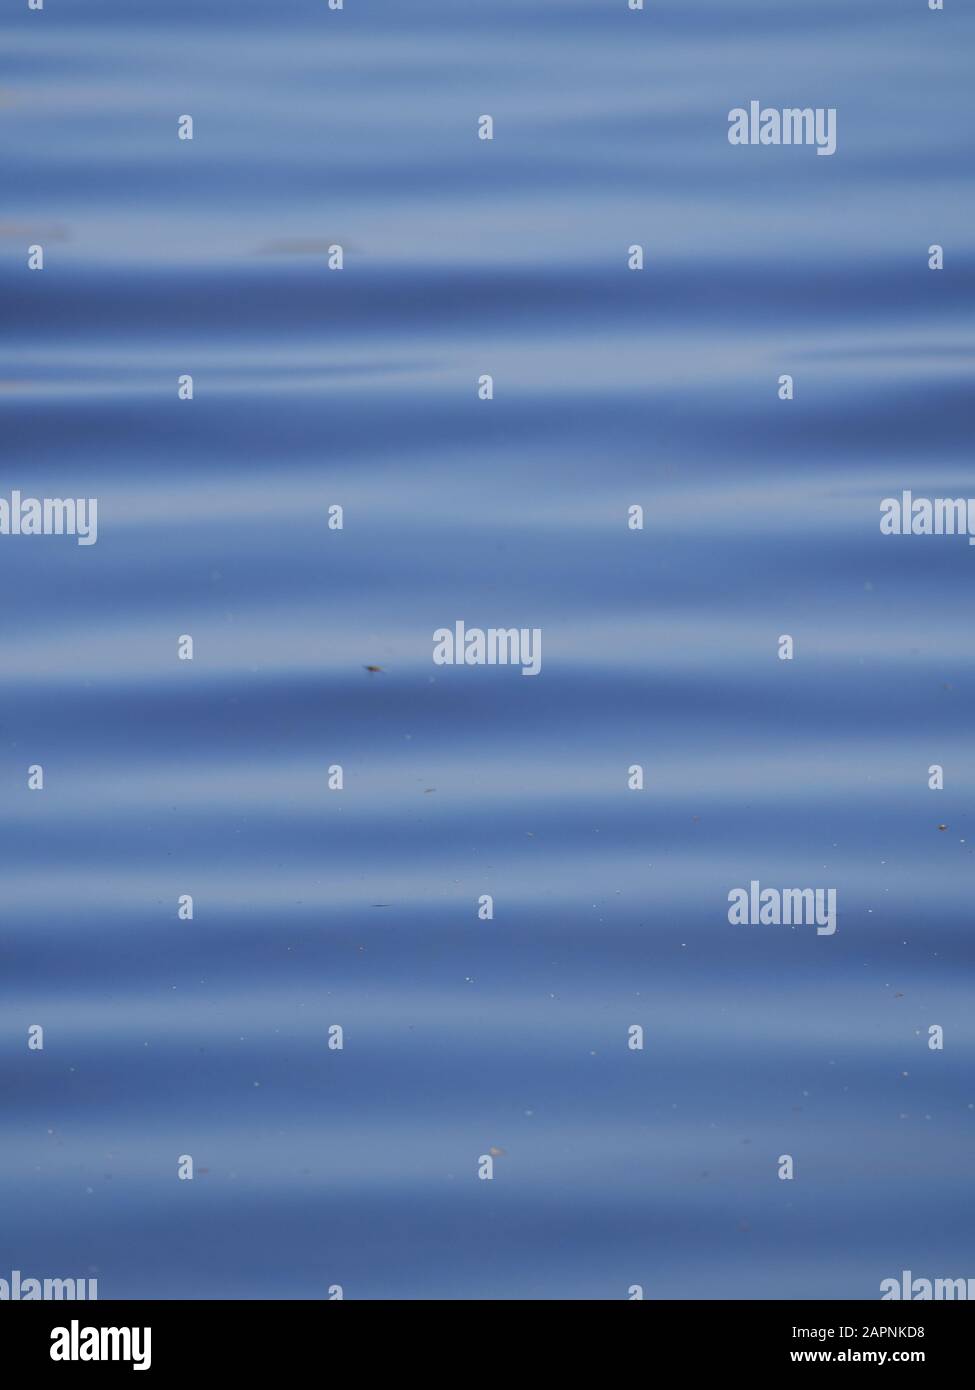 Blue water surface with waves, natural background photo. Stock Photo